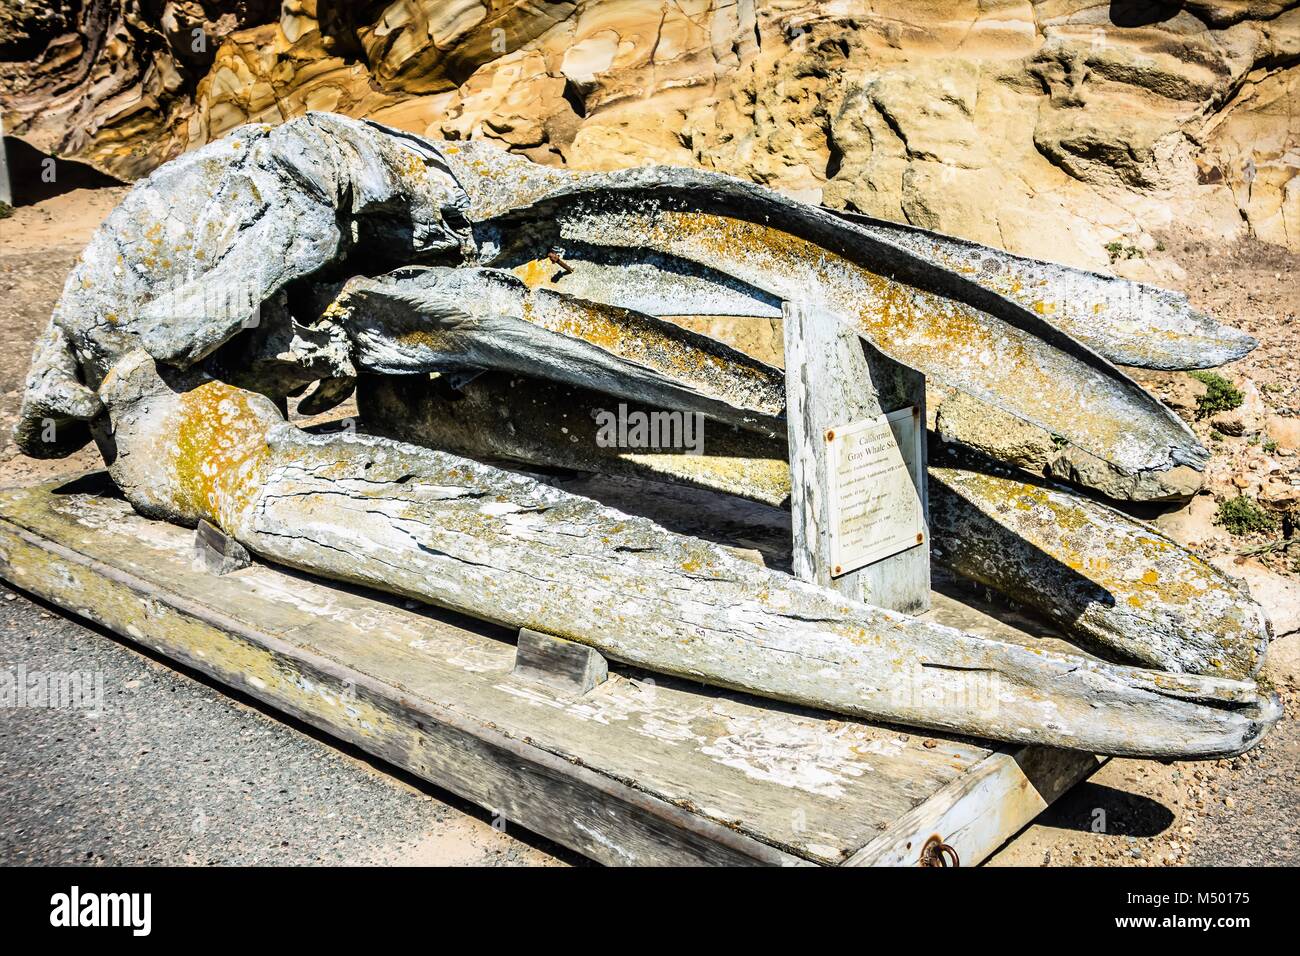 large california gray whale skull on display Stock Photo